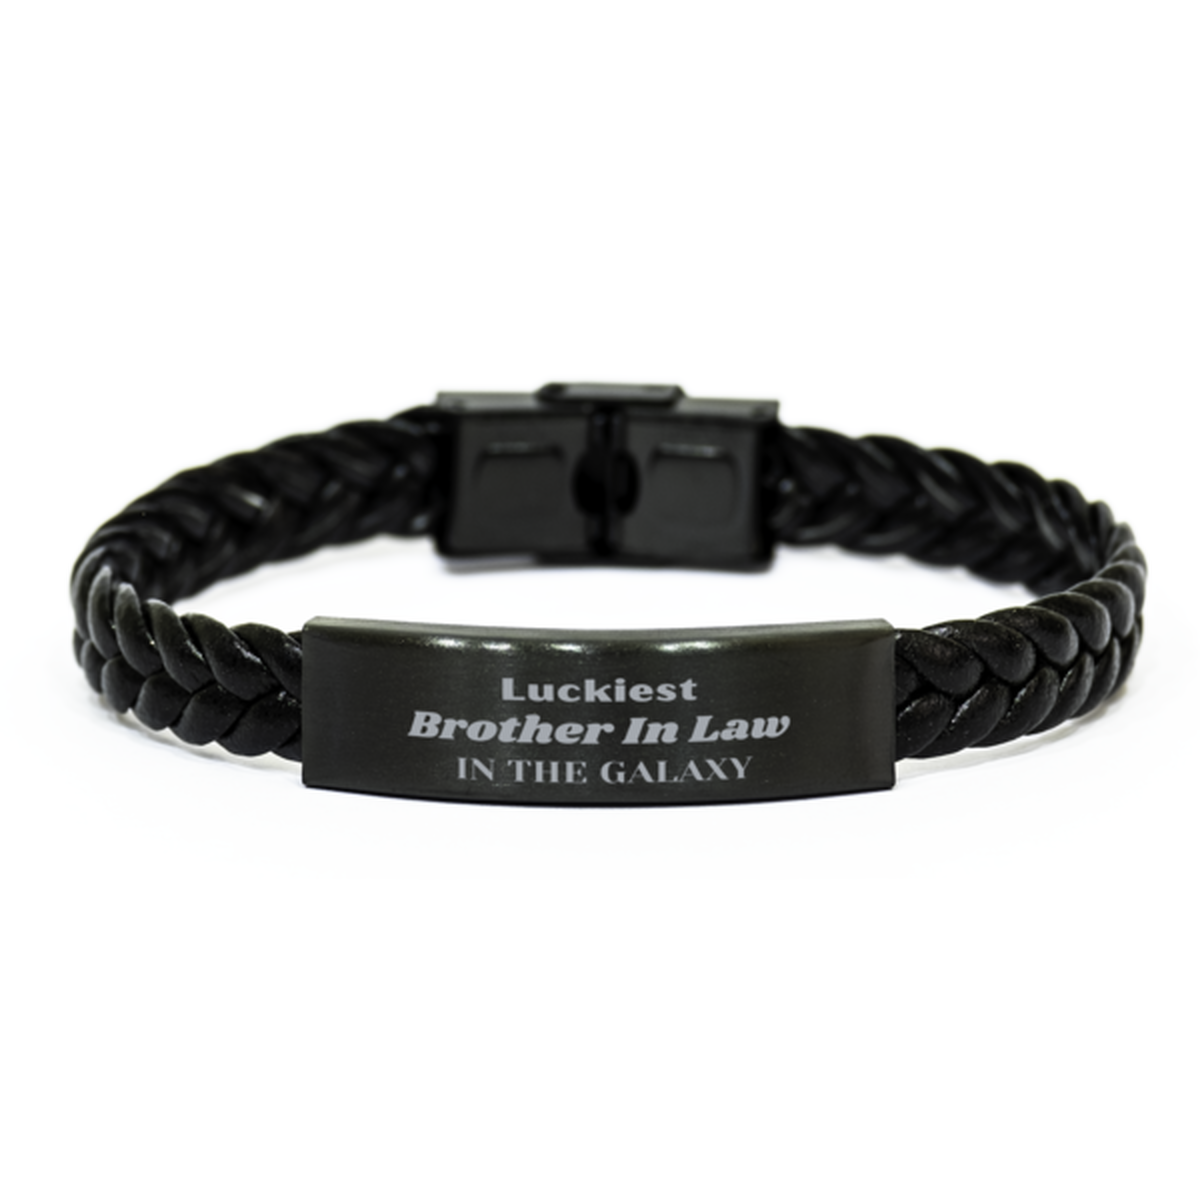 Luckiest Brother In Law in the Galaxy, To My Brother In Law Engraved Gifts, Christmas Brother In Law Braided Leather Bracelet Gifts, X-mas Birthday Unique Gifts For Brother In Law Men Women